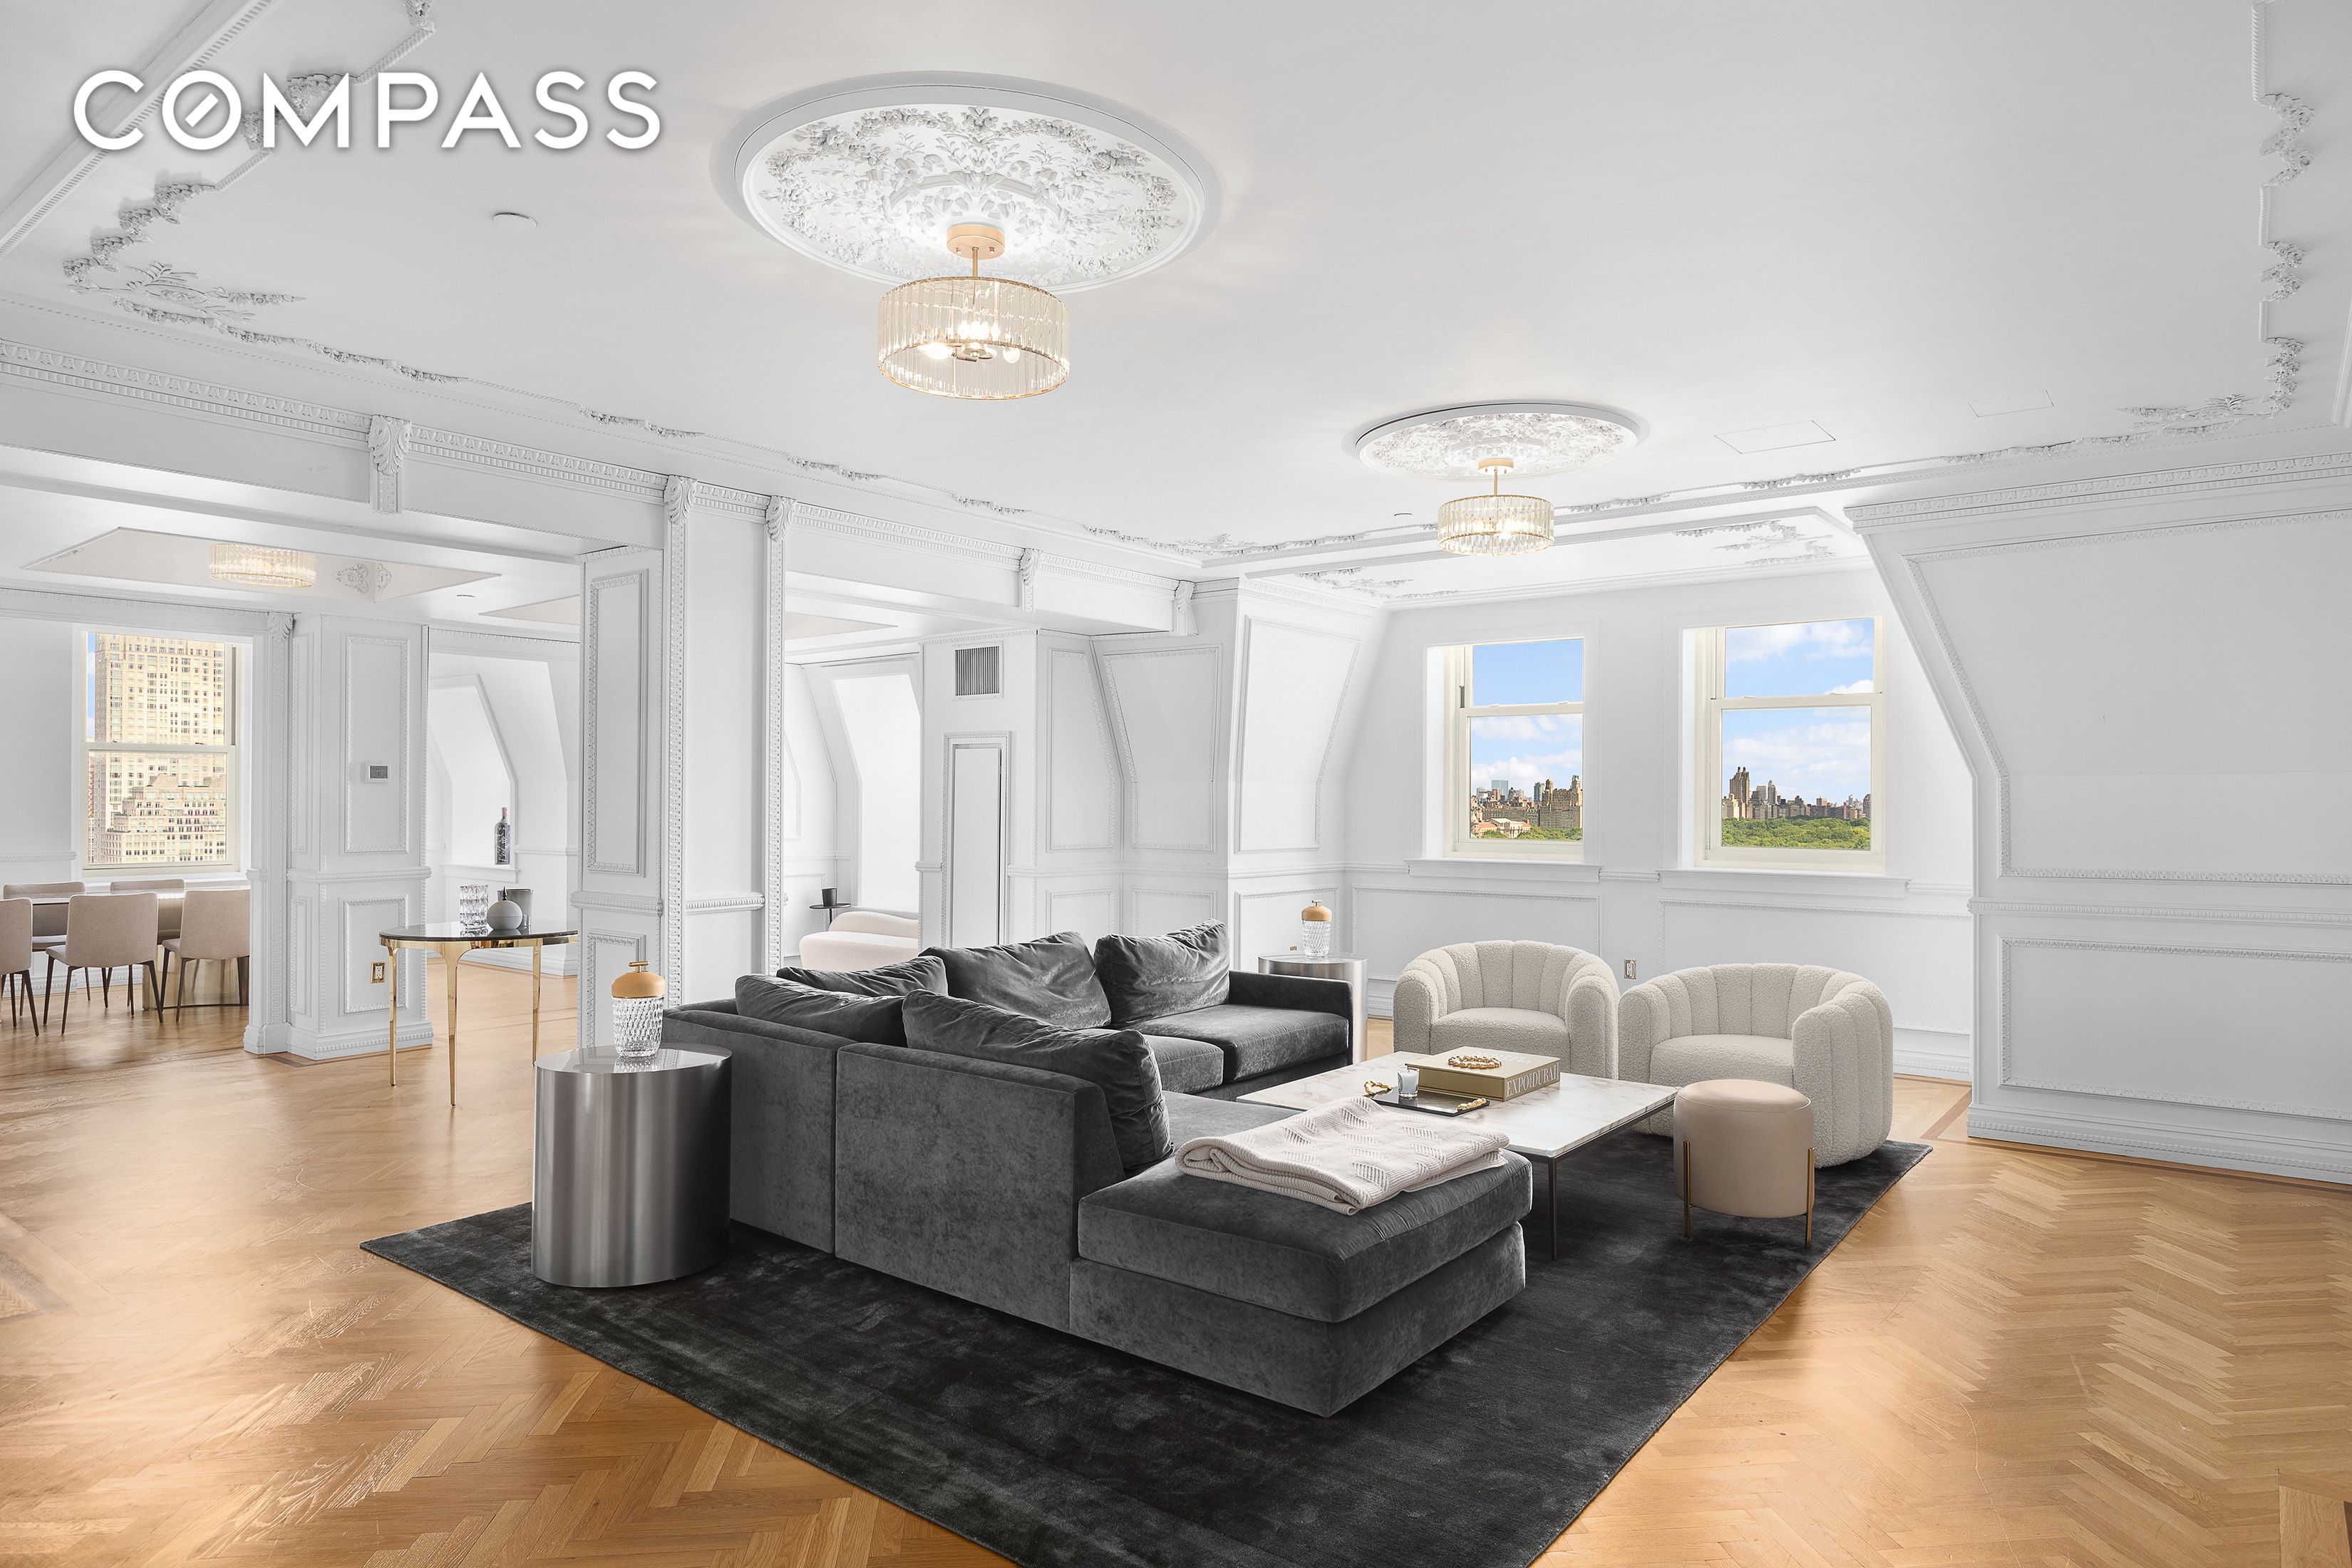 1 Central Park 1801, Central Park South, Midtown West, NYC - 4 Bedrooms  
3.5 Bathrooms  
10 Rooms - 